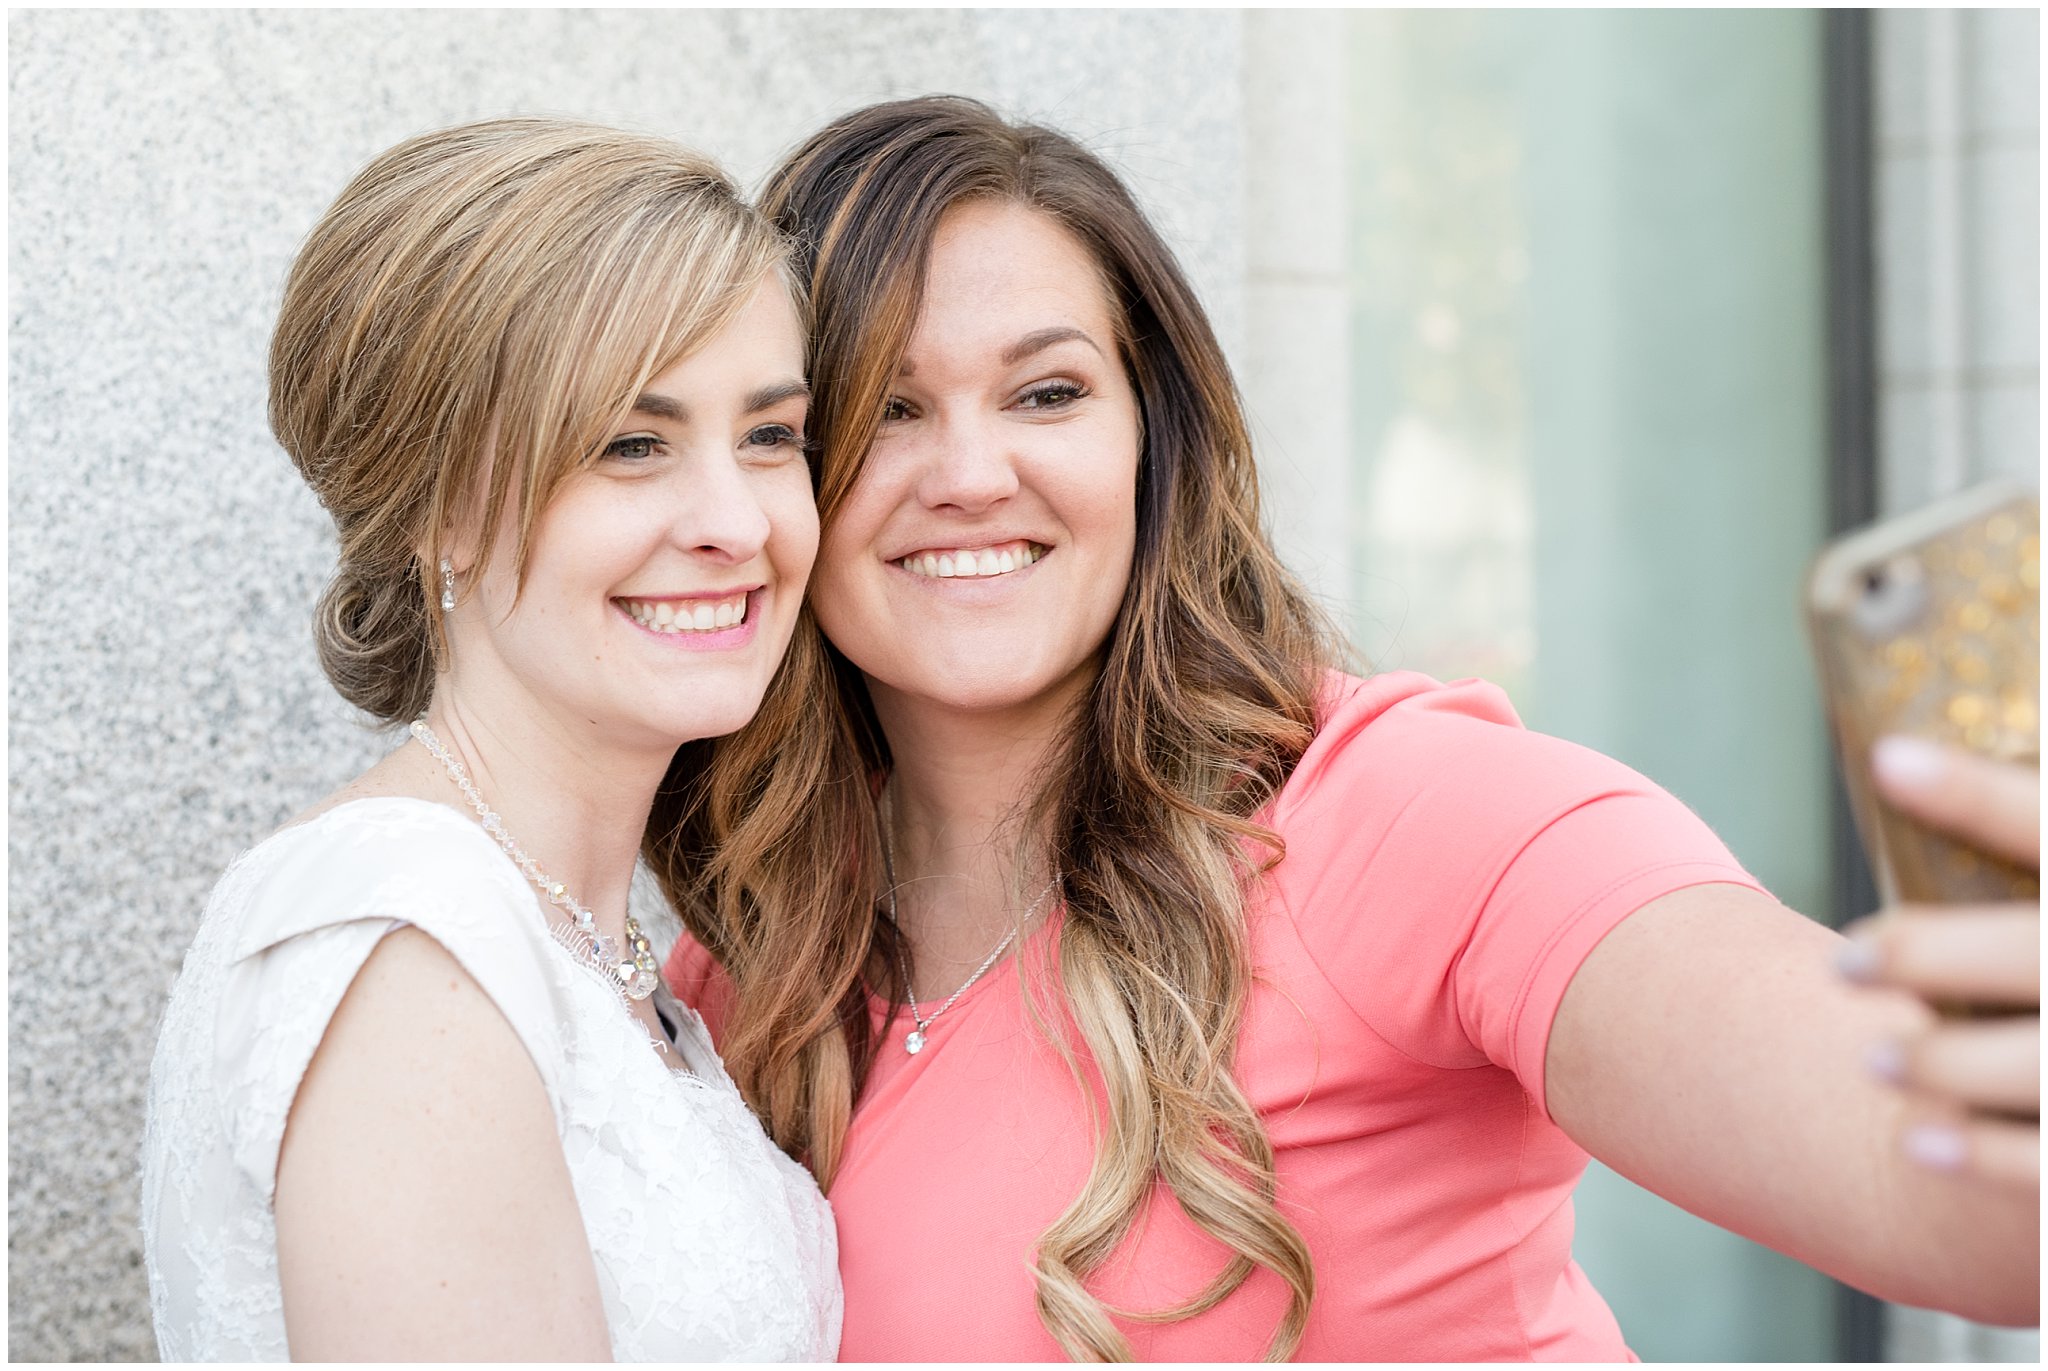 Salt Lake Temple candid wedding pictures | Coral and grey spring wedding